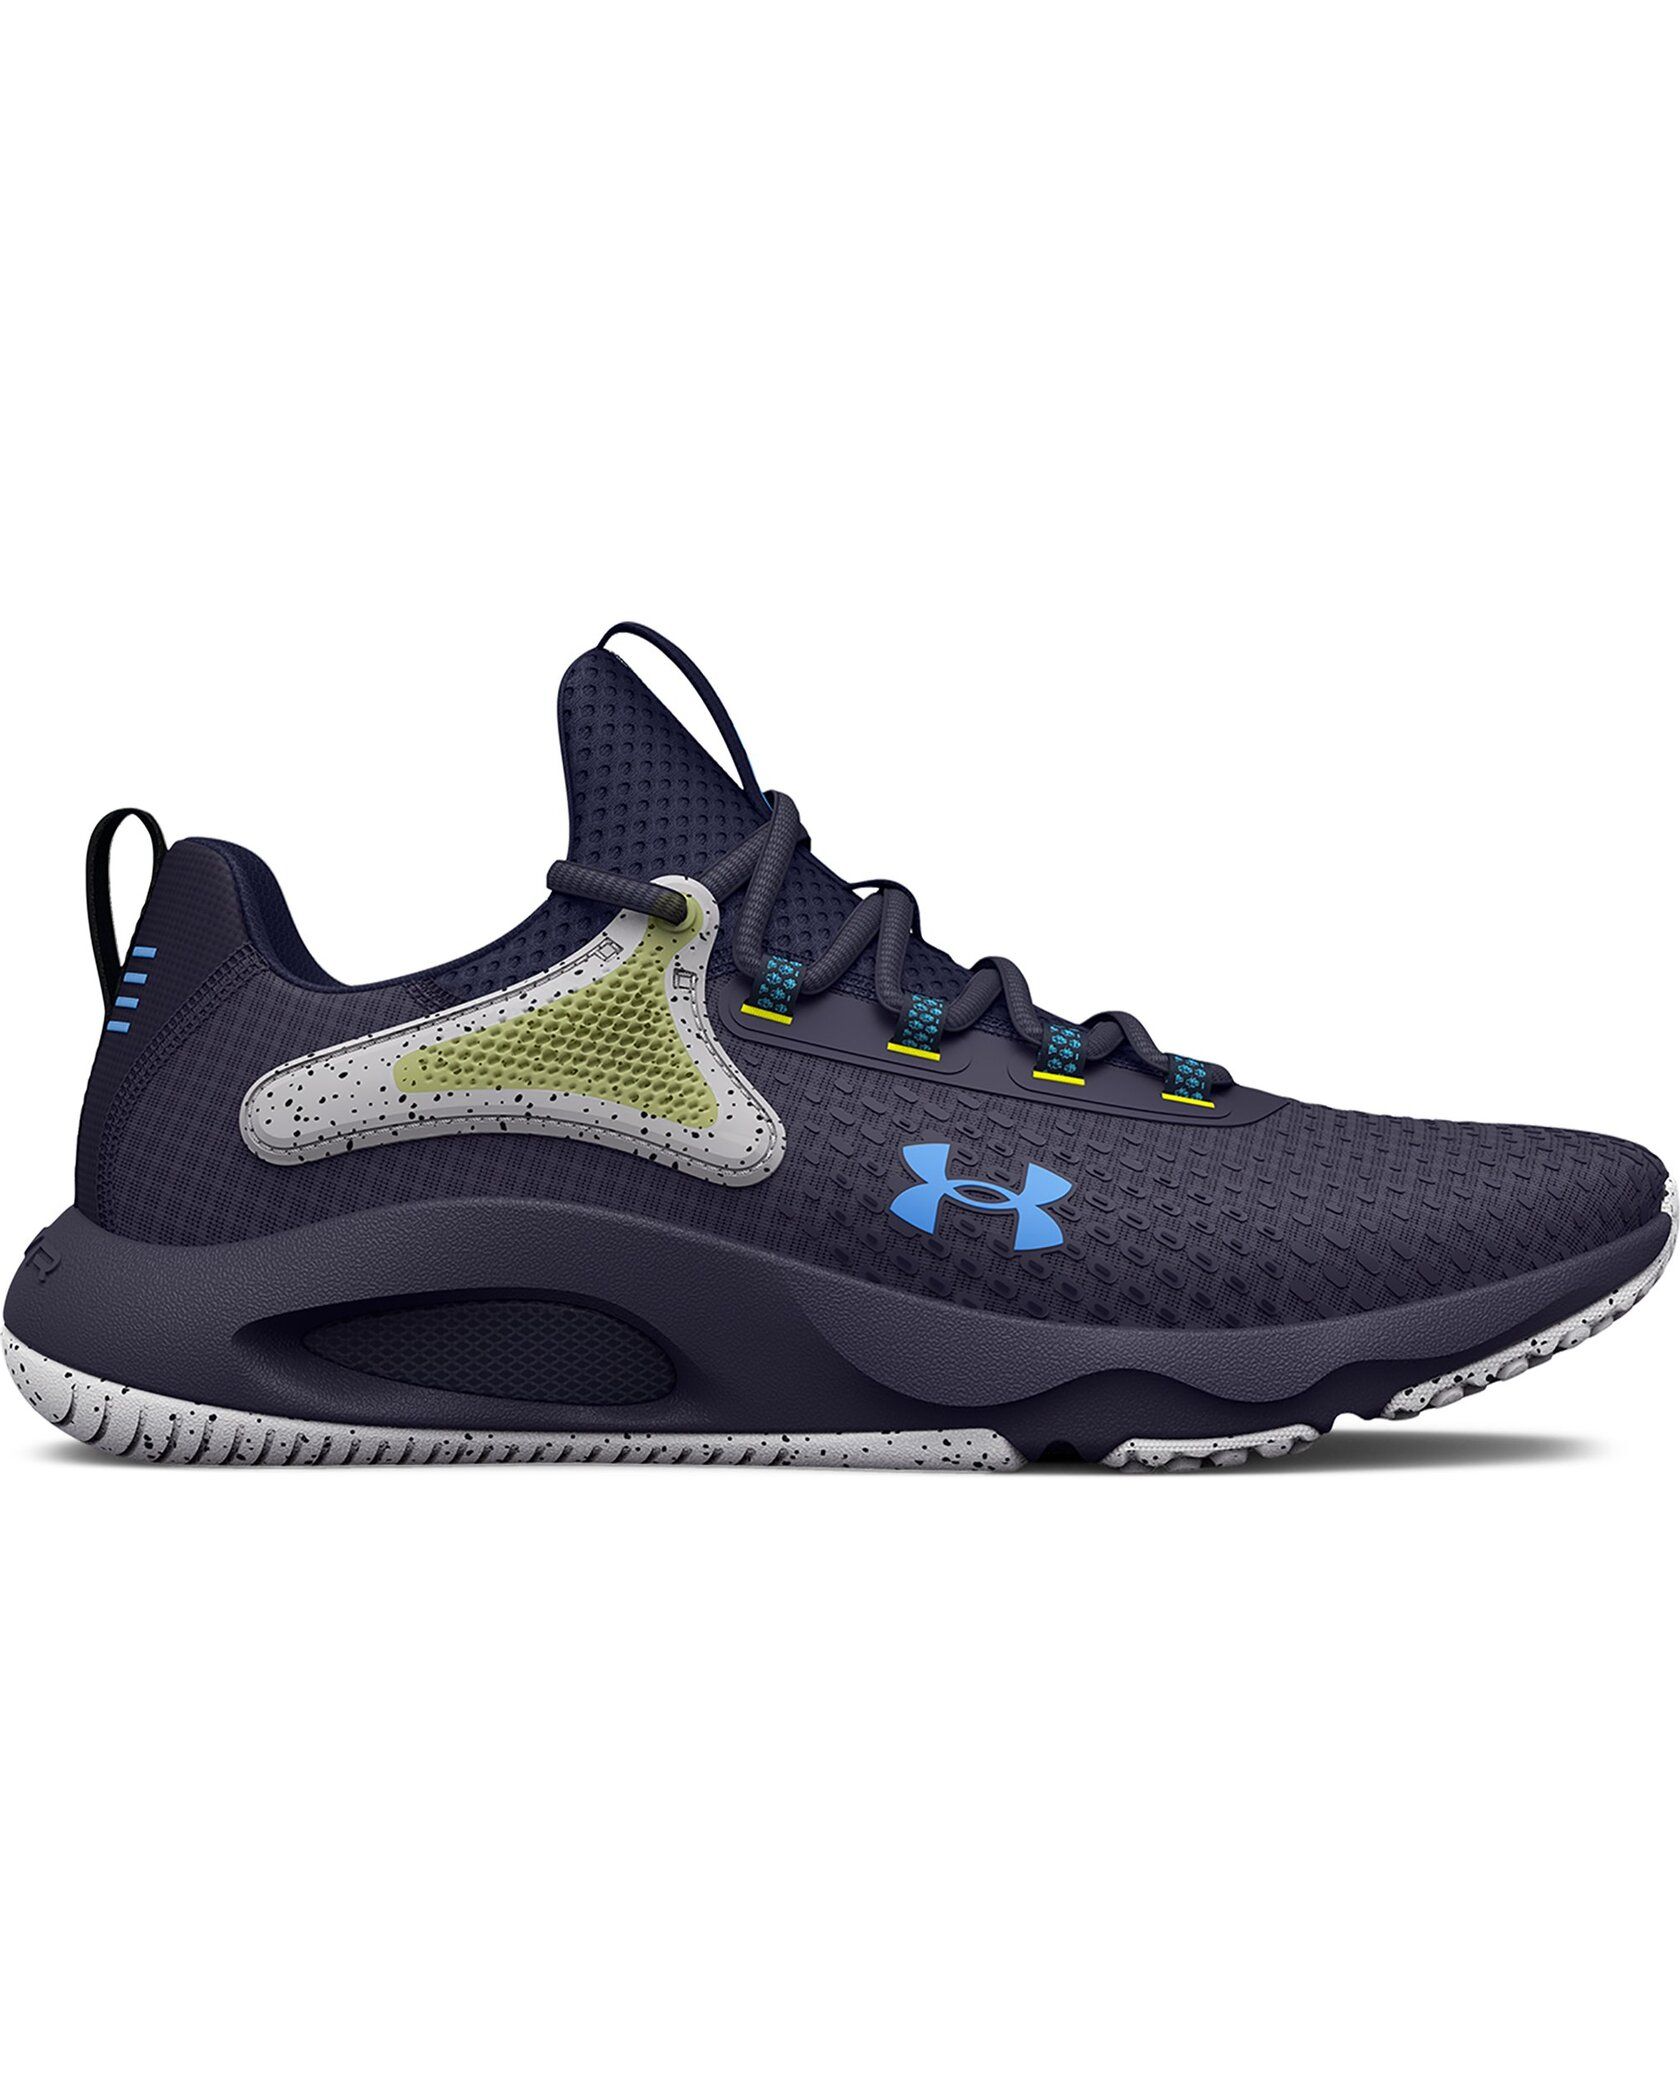 UNDER ARMOUR Unisex Black Project Rock BSR 2 Training Shoes Price in India,  Full Specifications & Offers